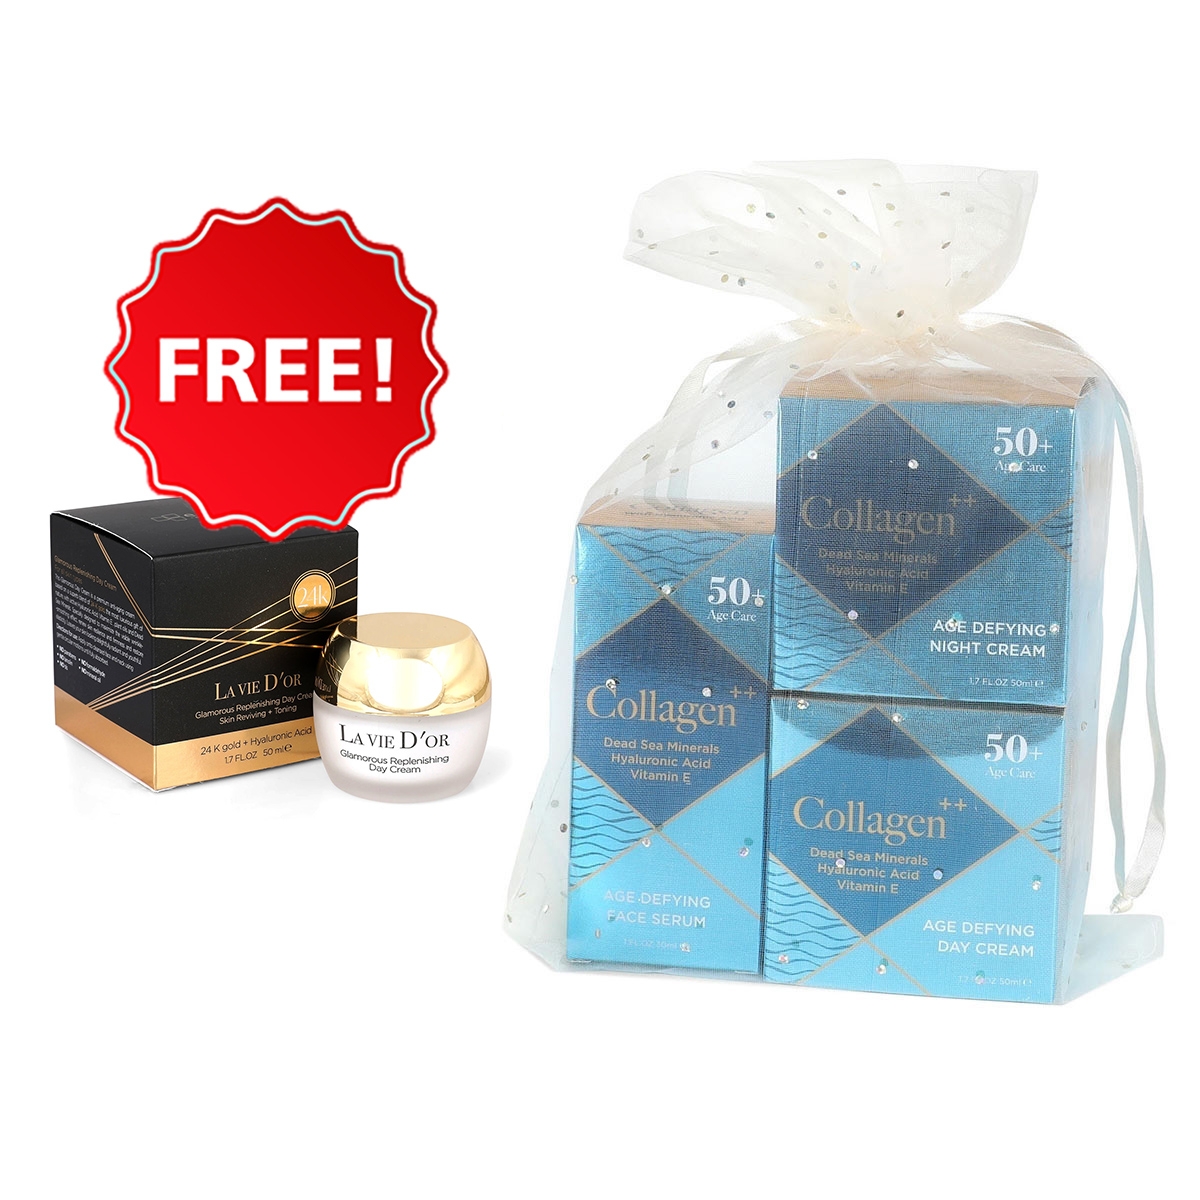 Edom 50+ Age-Defying Facial Set - Buy Three Facial Treatments and Get La Vie D’Or Glamorous Replenishing Day Cream for FREE! - 1